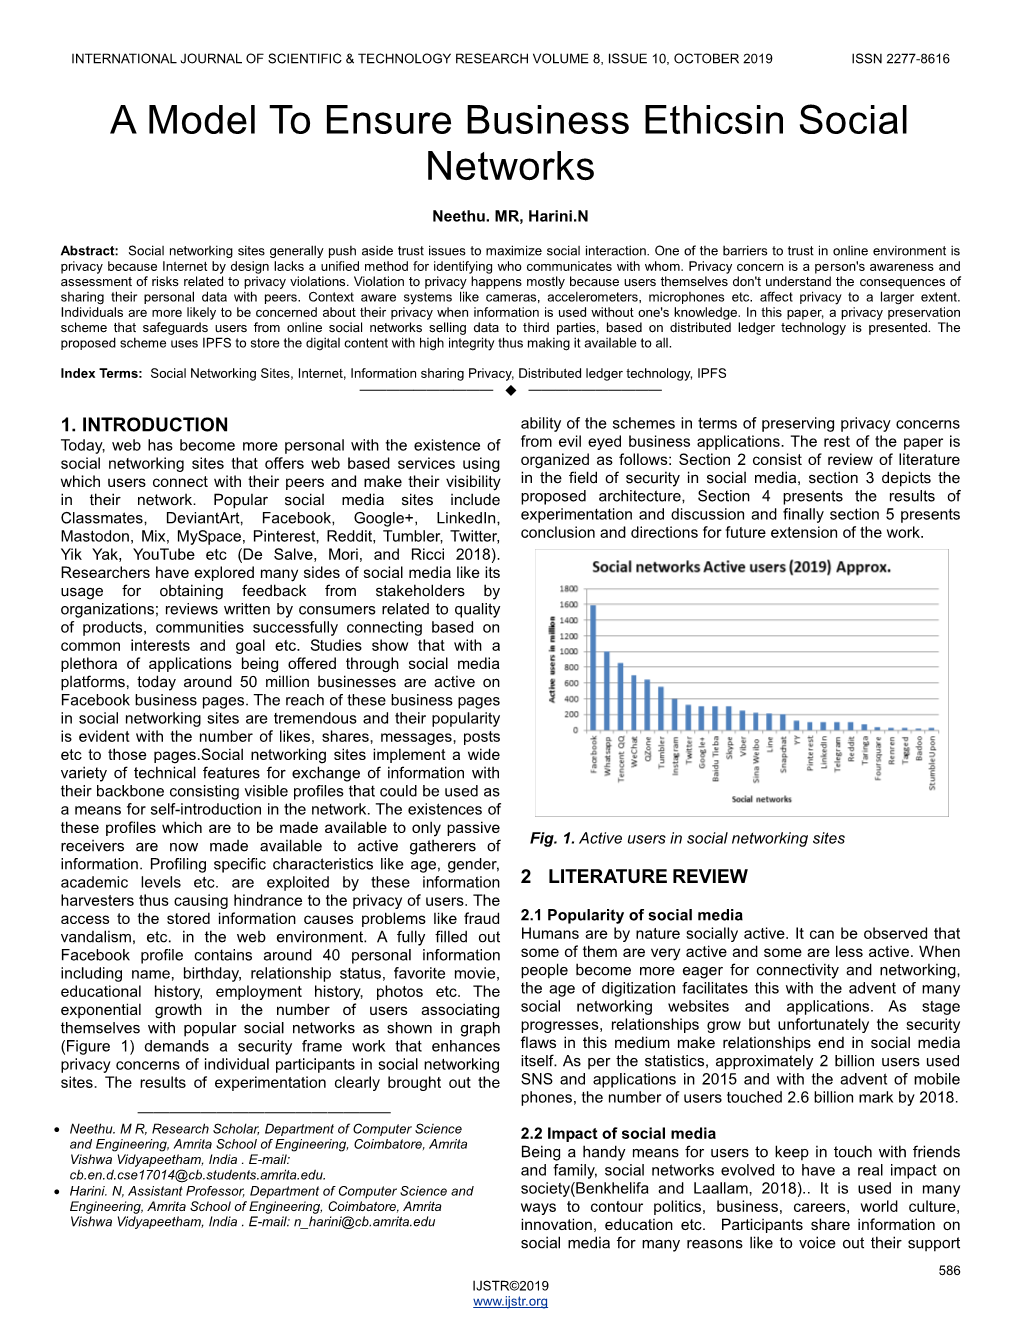 A Model to Ensure Business Ethicsin Social Networks